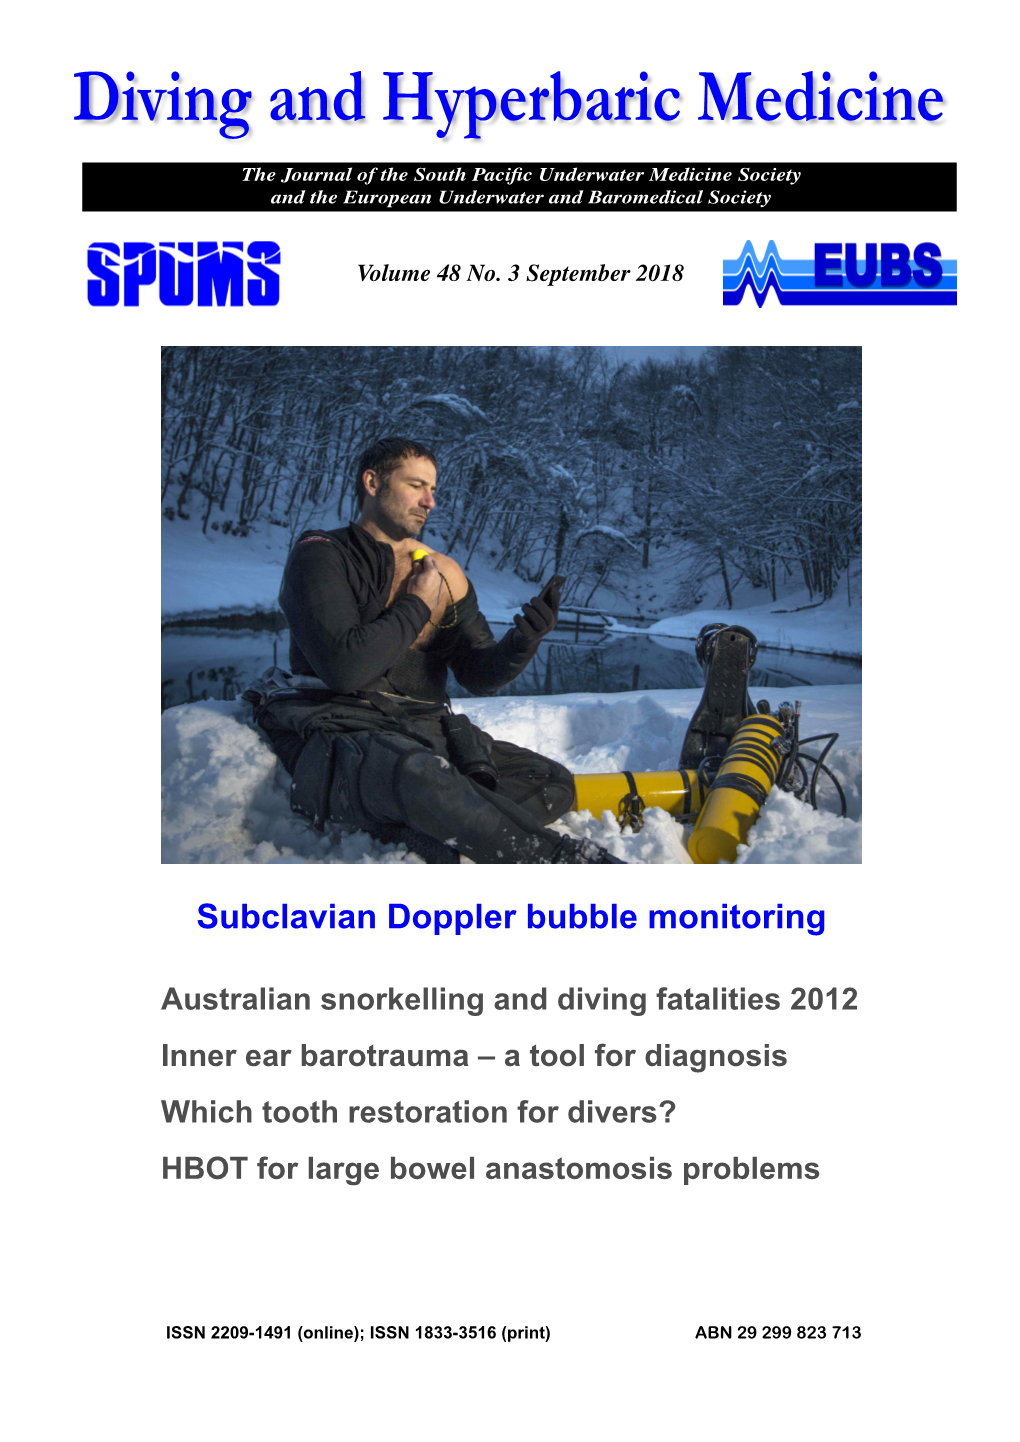 Diving and Hyperbaric Medicine the Journal of the South Pacific Underwater Medicine Society and the European Underwater and Baromedical Society